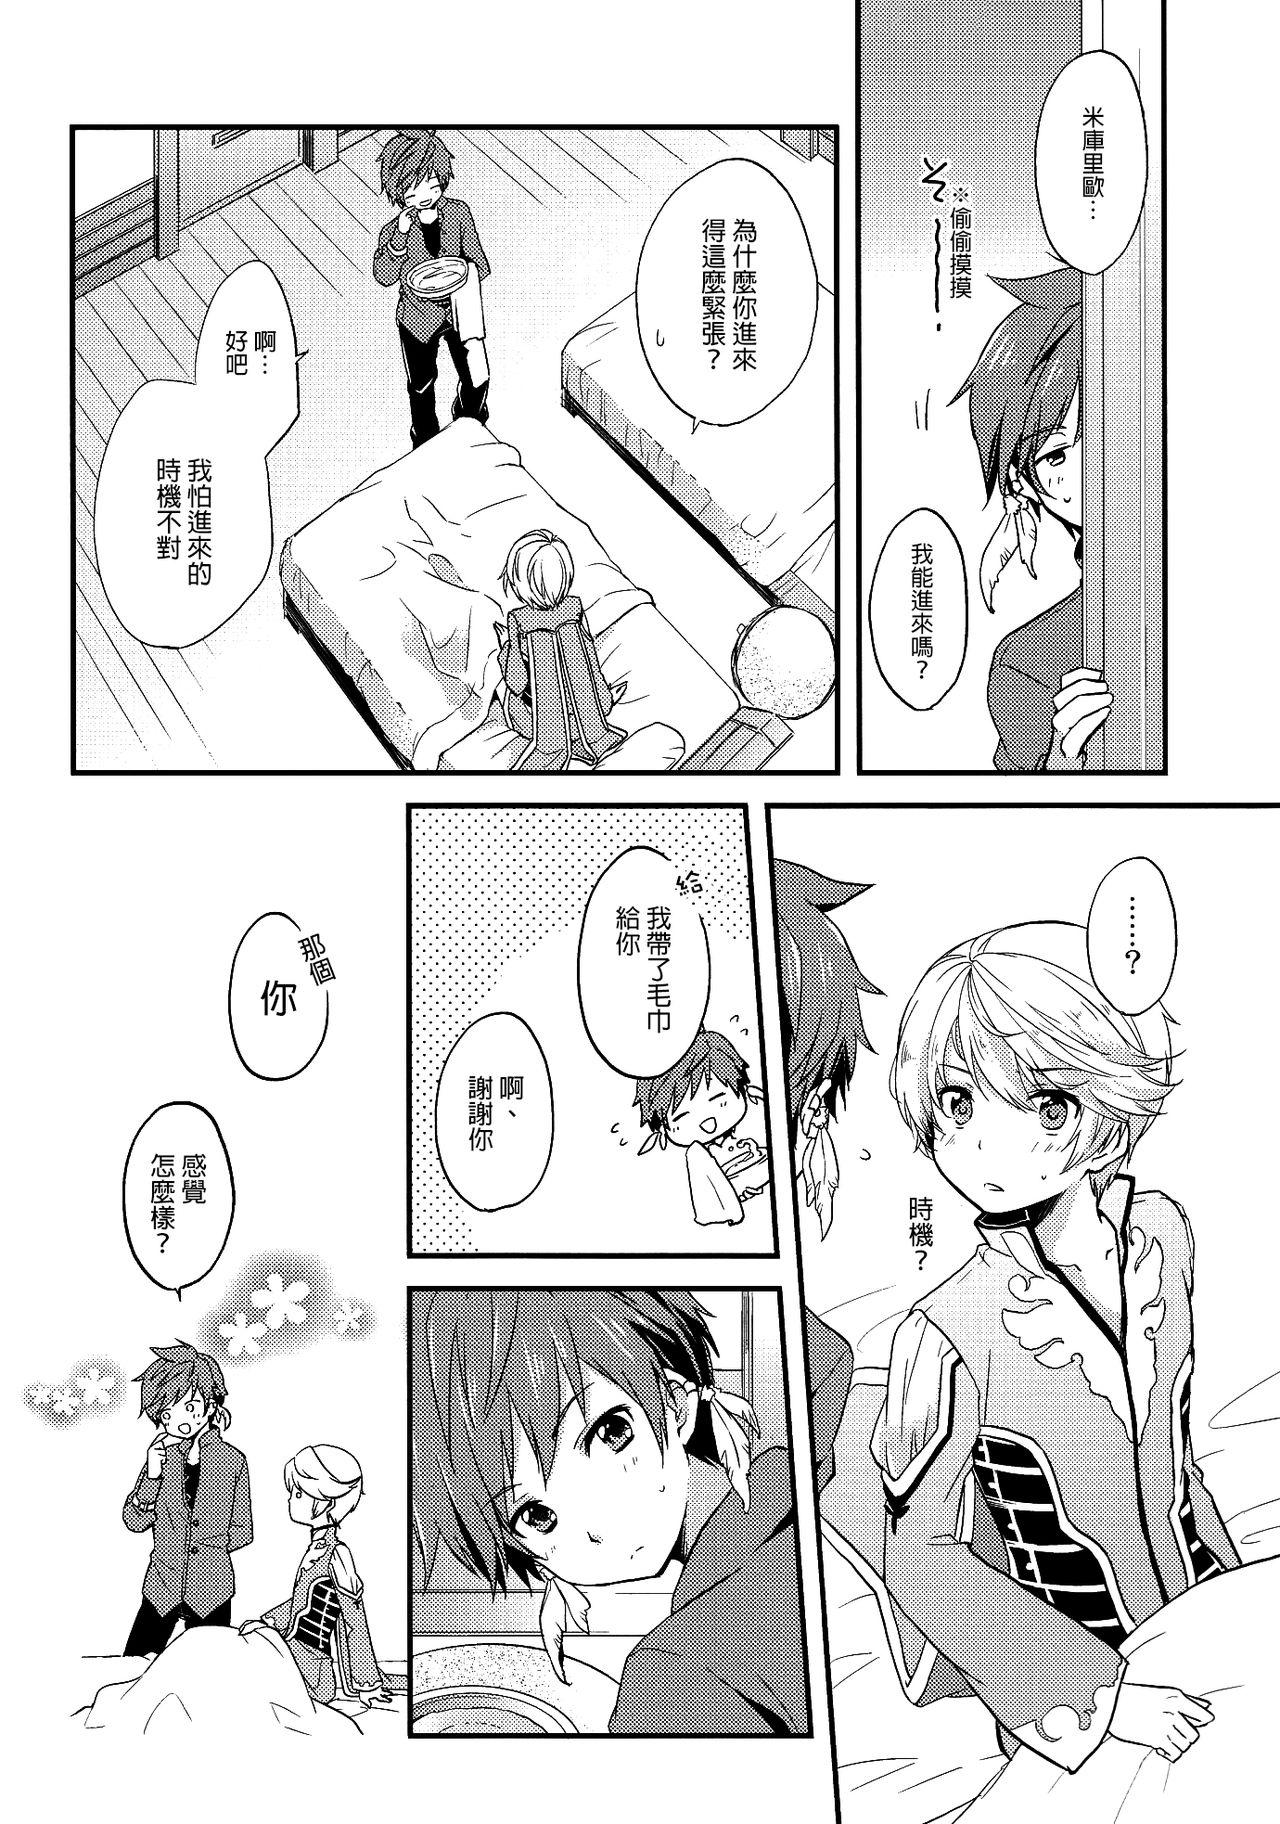 Close Datte Dare mo Oshiete Kurenai | That's because nobody taught me - Tales of zestiria Slapping - Page 6